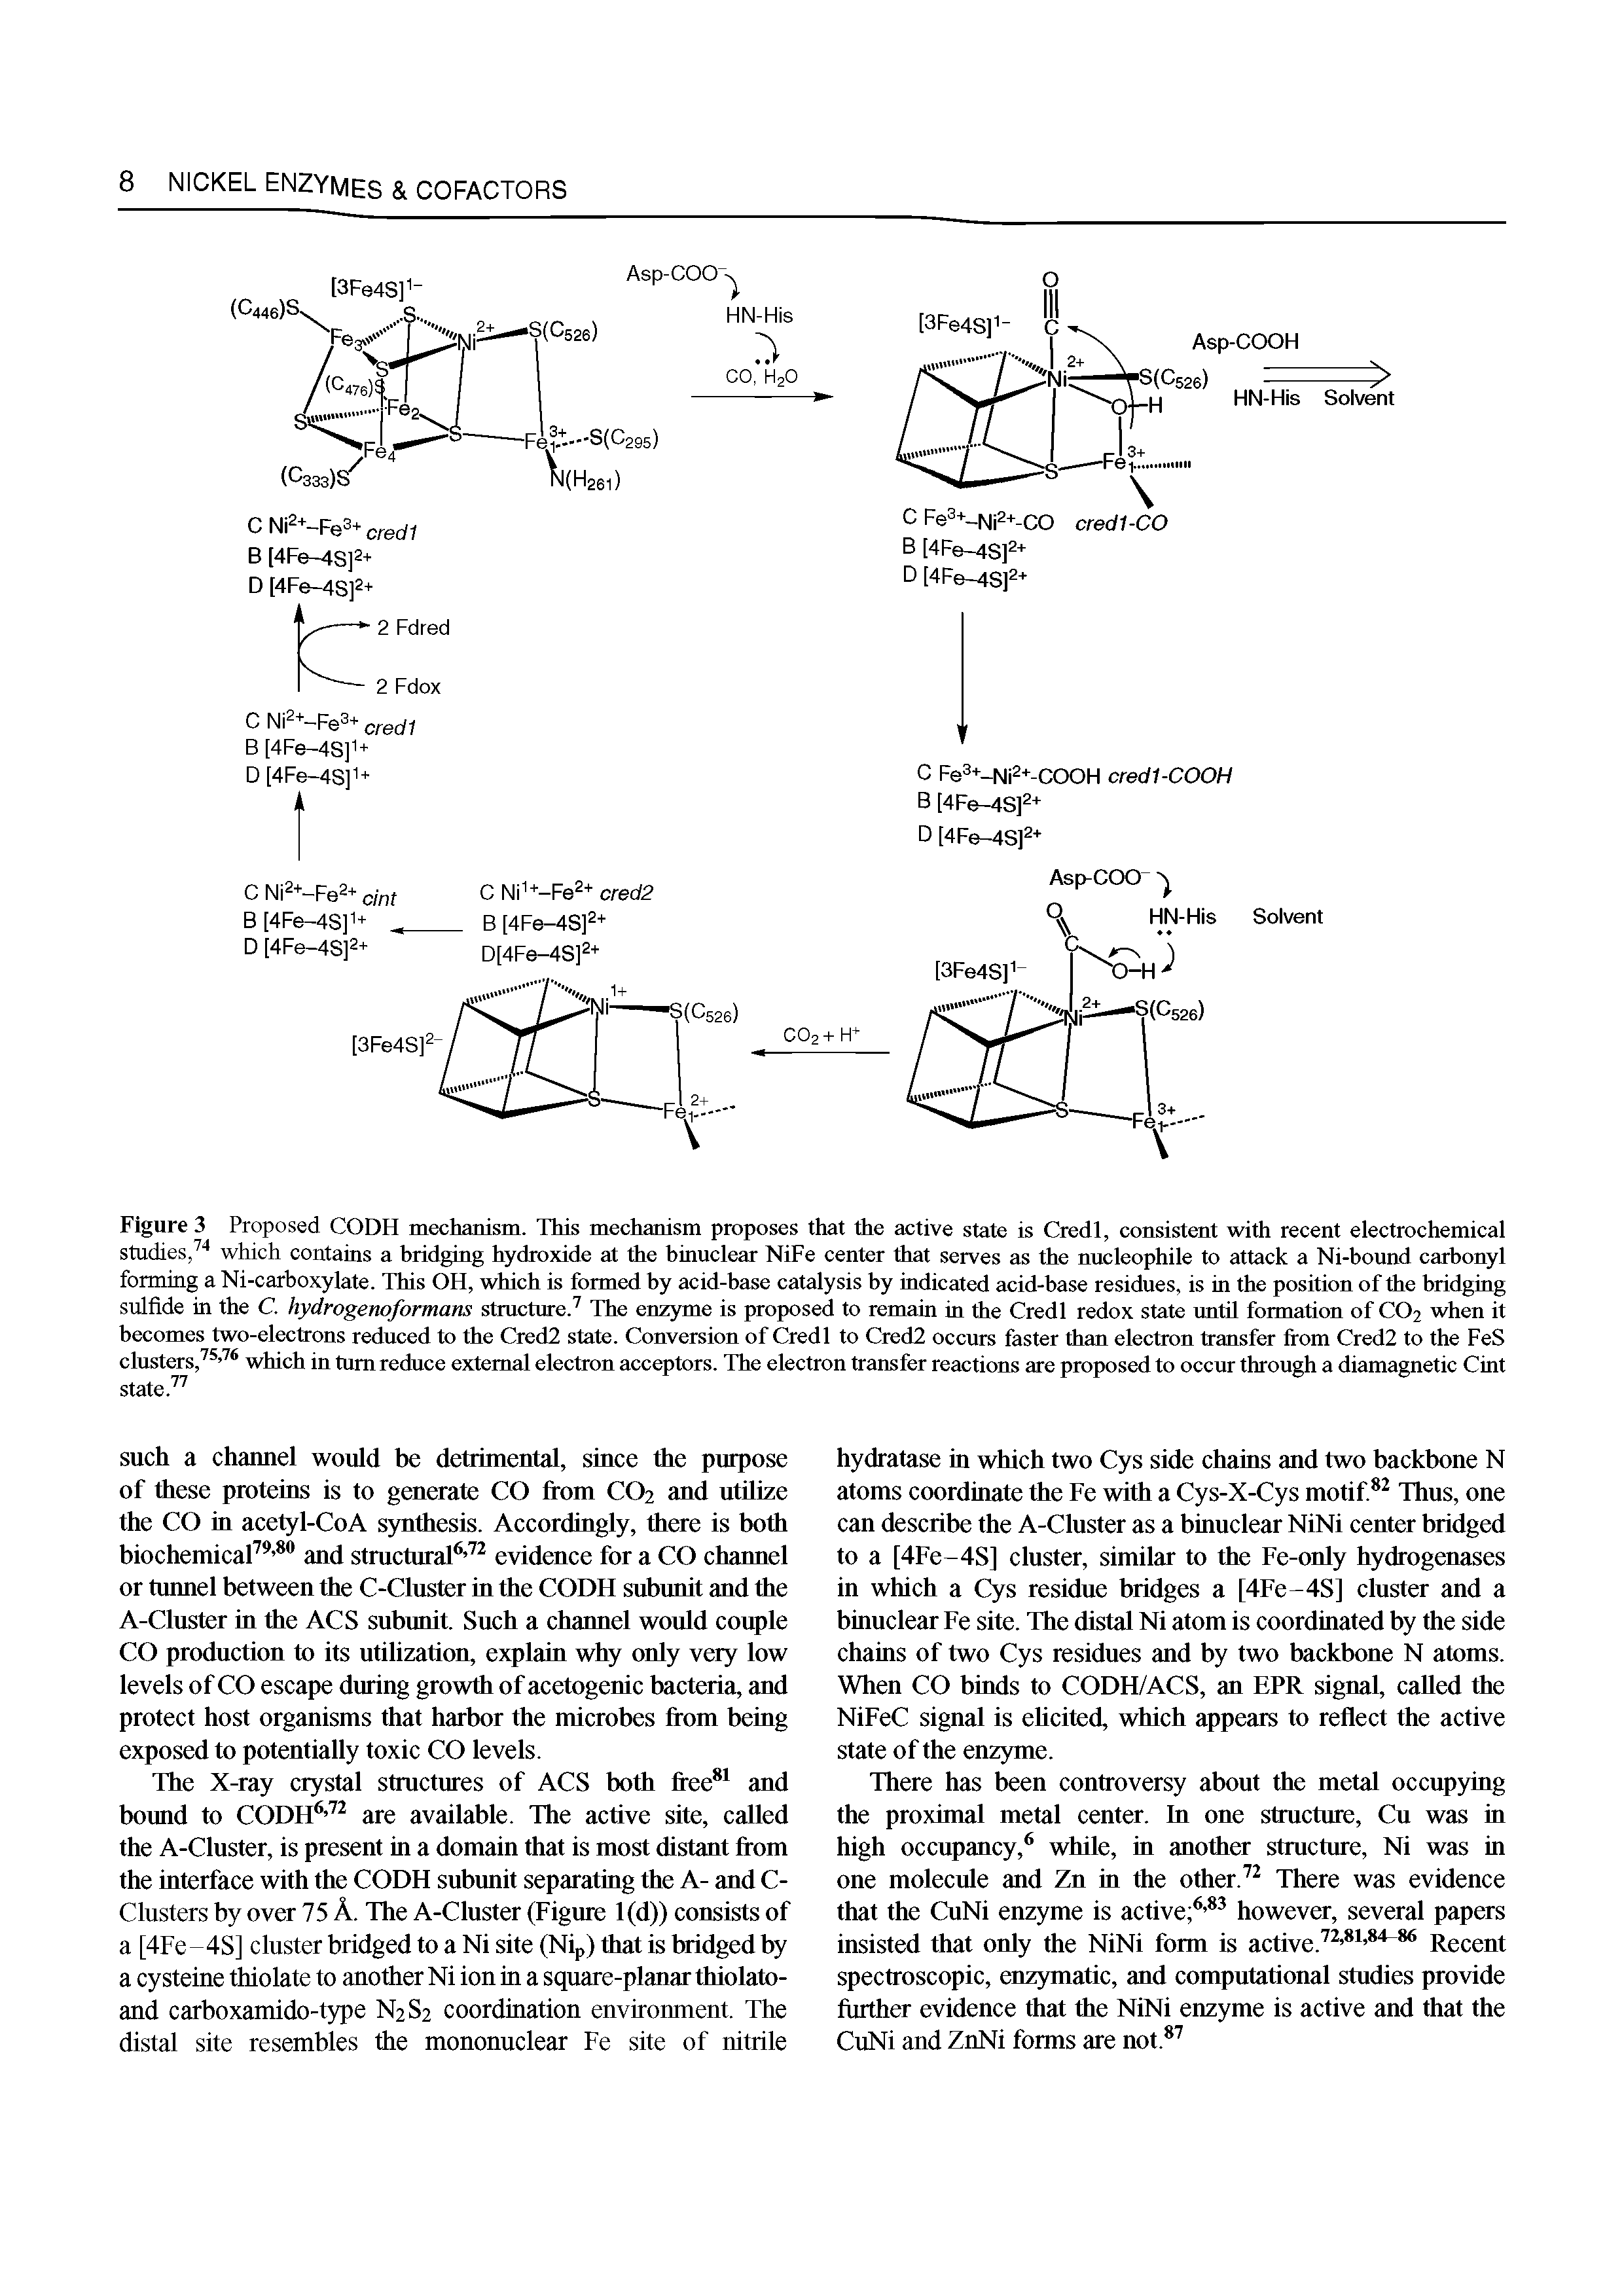 Figure 3 Proposed CODH mechanism. This mechanism proposes that the active state is Credl, consistent with recent electrochemical studies,which contains a hridghig hydroxide at the hinuclear NiFe center that serves as the nucleophile to attack a Ni-bound carbonyl forming a Ni-carboxylate. This OH, which is formed by acid-hase catalysis by indicated acid-base residues, is in the position of the bridging sulfide in the C. hydrogenoformans structure. The enzyme is proposed to remain in the Credl redox state until formation of CO2 when it becomes two-electrons reduced to the Cred2 state. Conversion of Credl to Cred2 occurs faster than electron transfer from Cred2 to the FeS clusters, which in turn reduce external electron acceptors. The electron transfer reactions are proposed to occur through a diamagnetic Cint state. ...